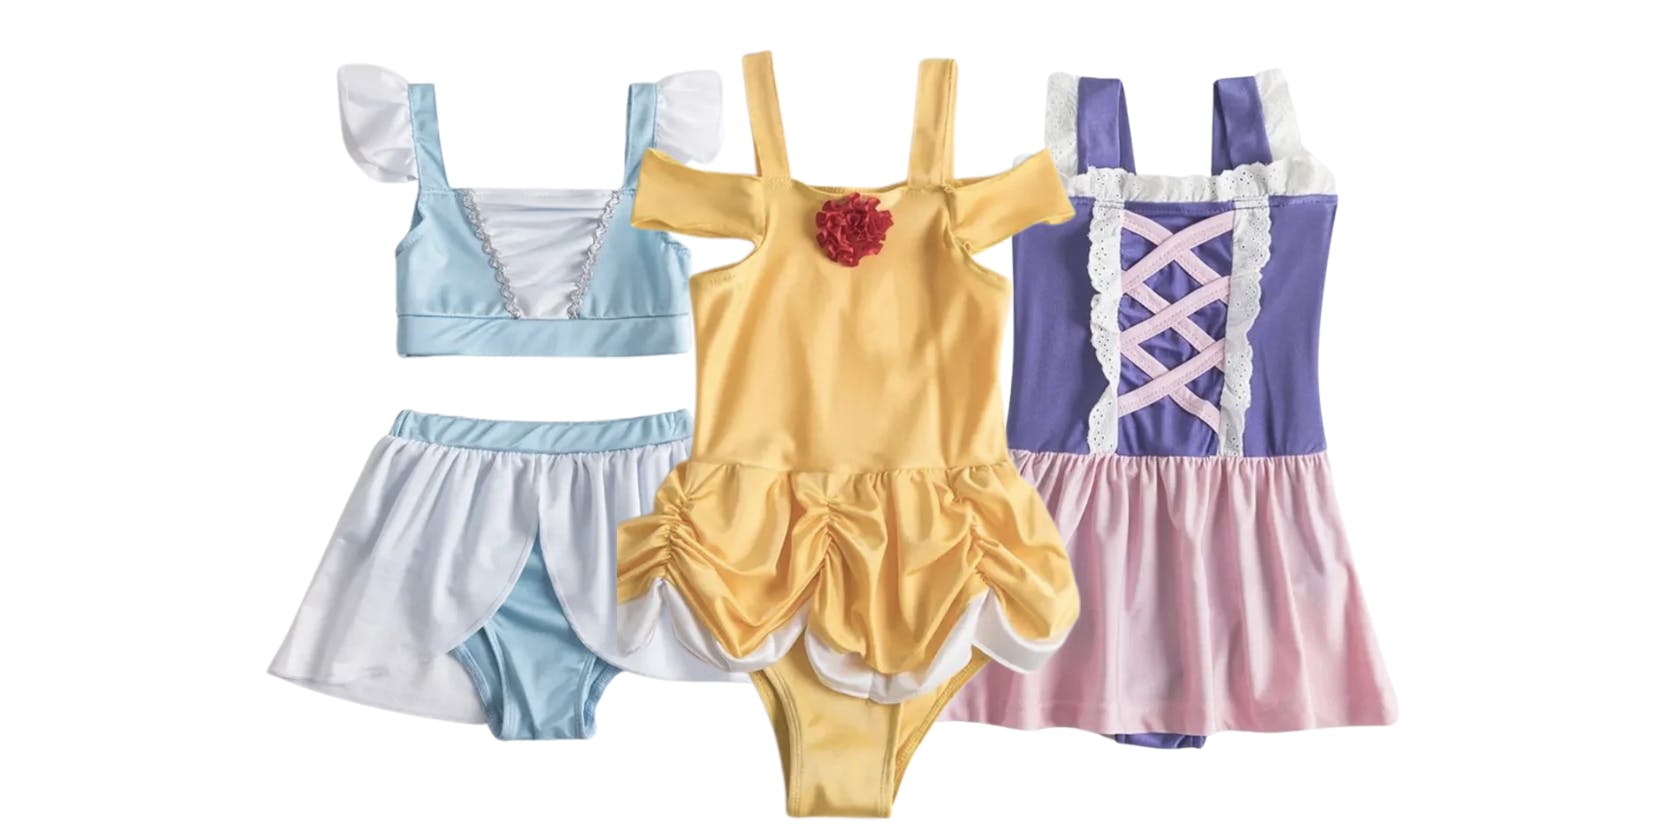 Jane Kids Character Swim Suits Featured Image 2023 2